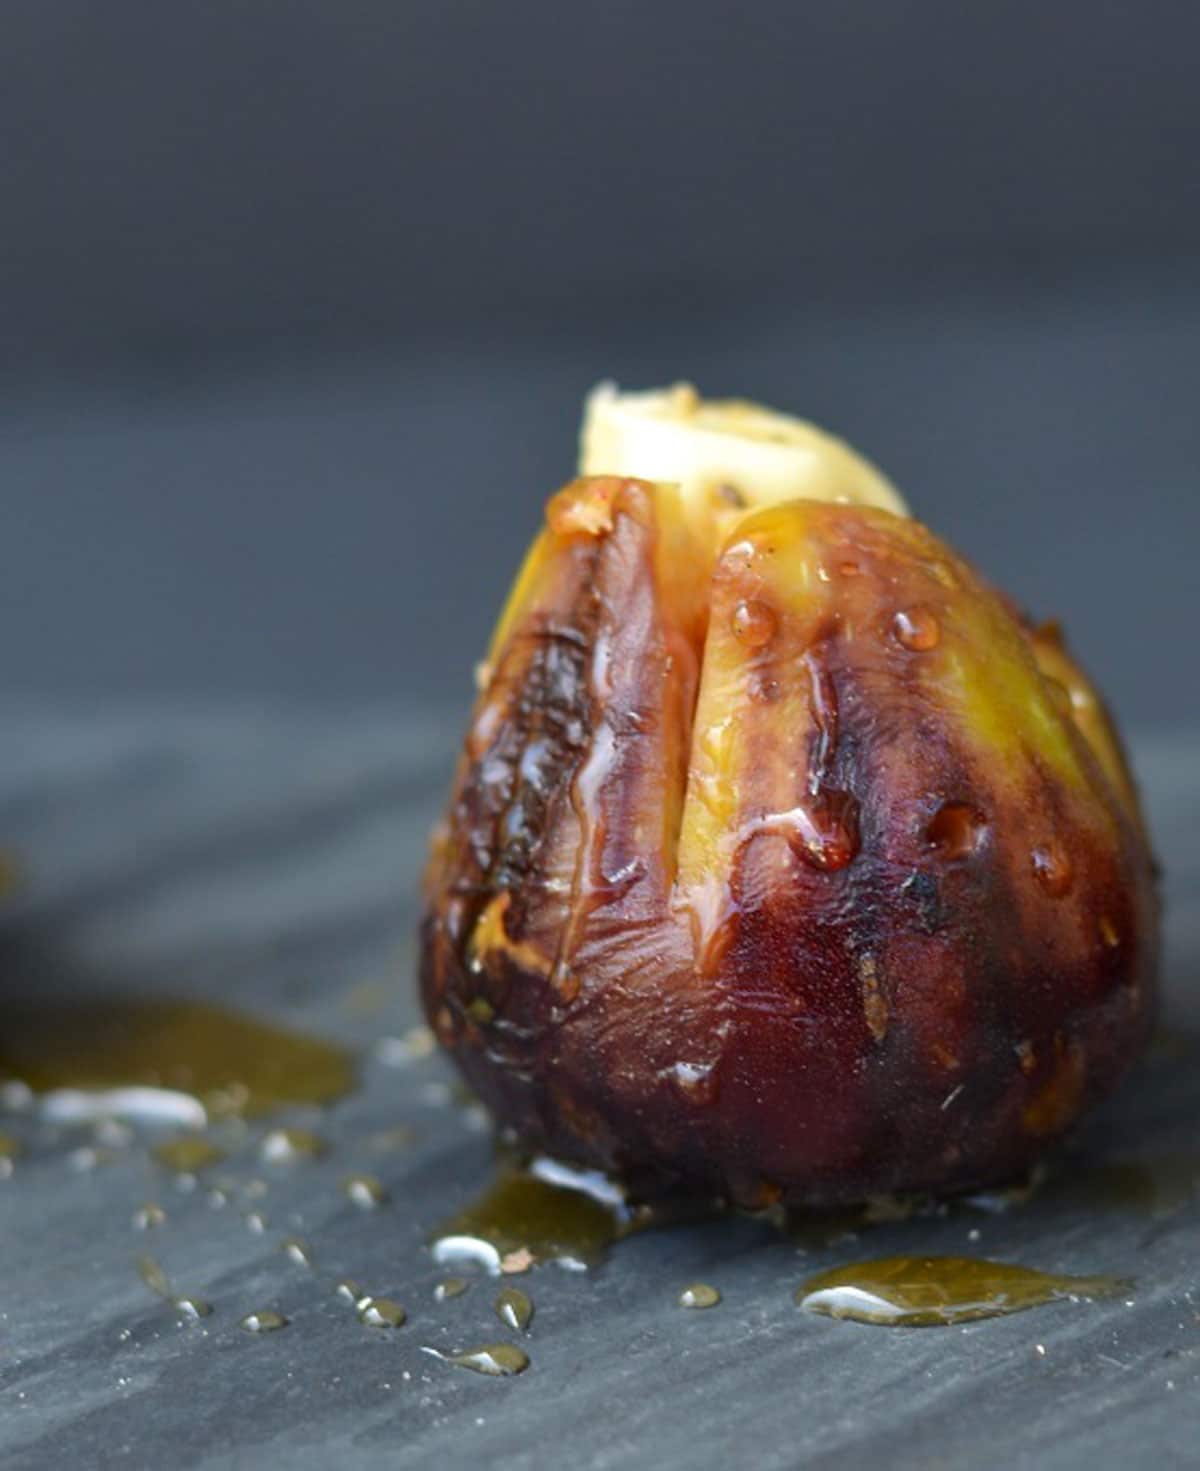 A single brown grilled fig stuffed with brie.